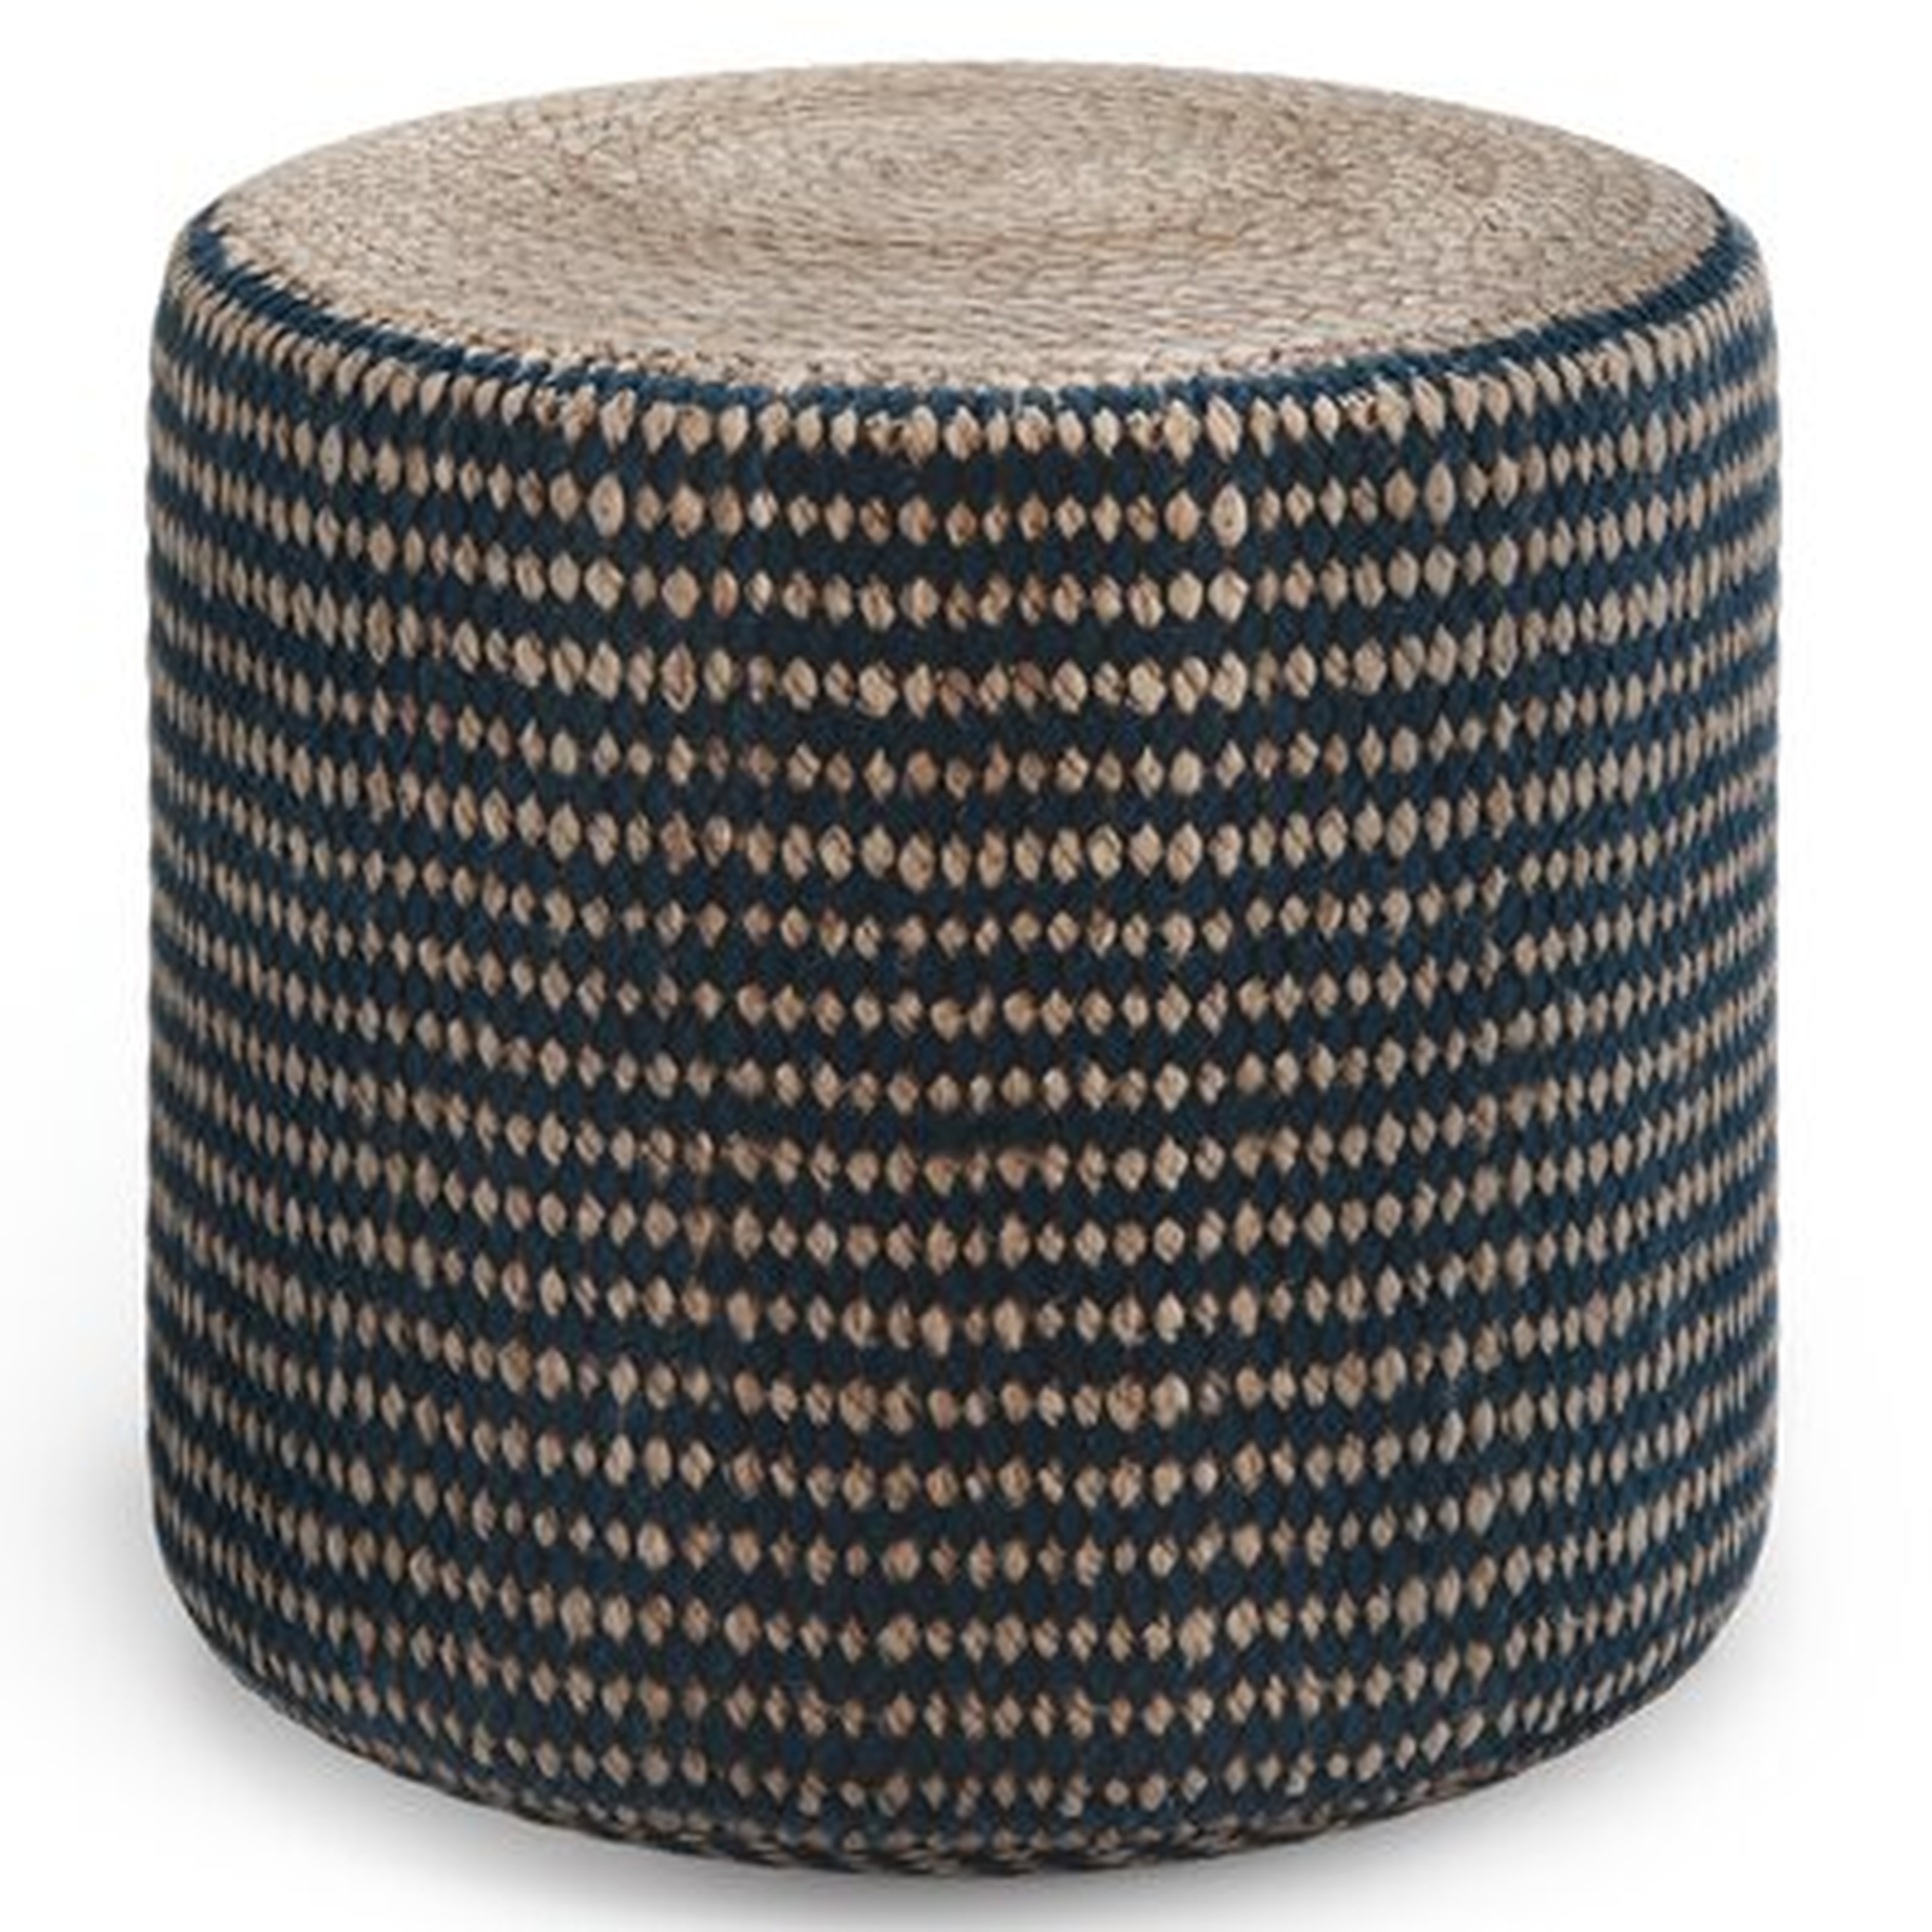 Tommen 18'' Wide Round Striped Pouf Ottoman, Natural & Teal - Wayfair